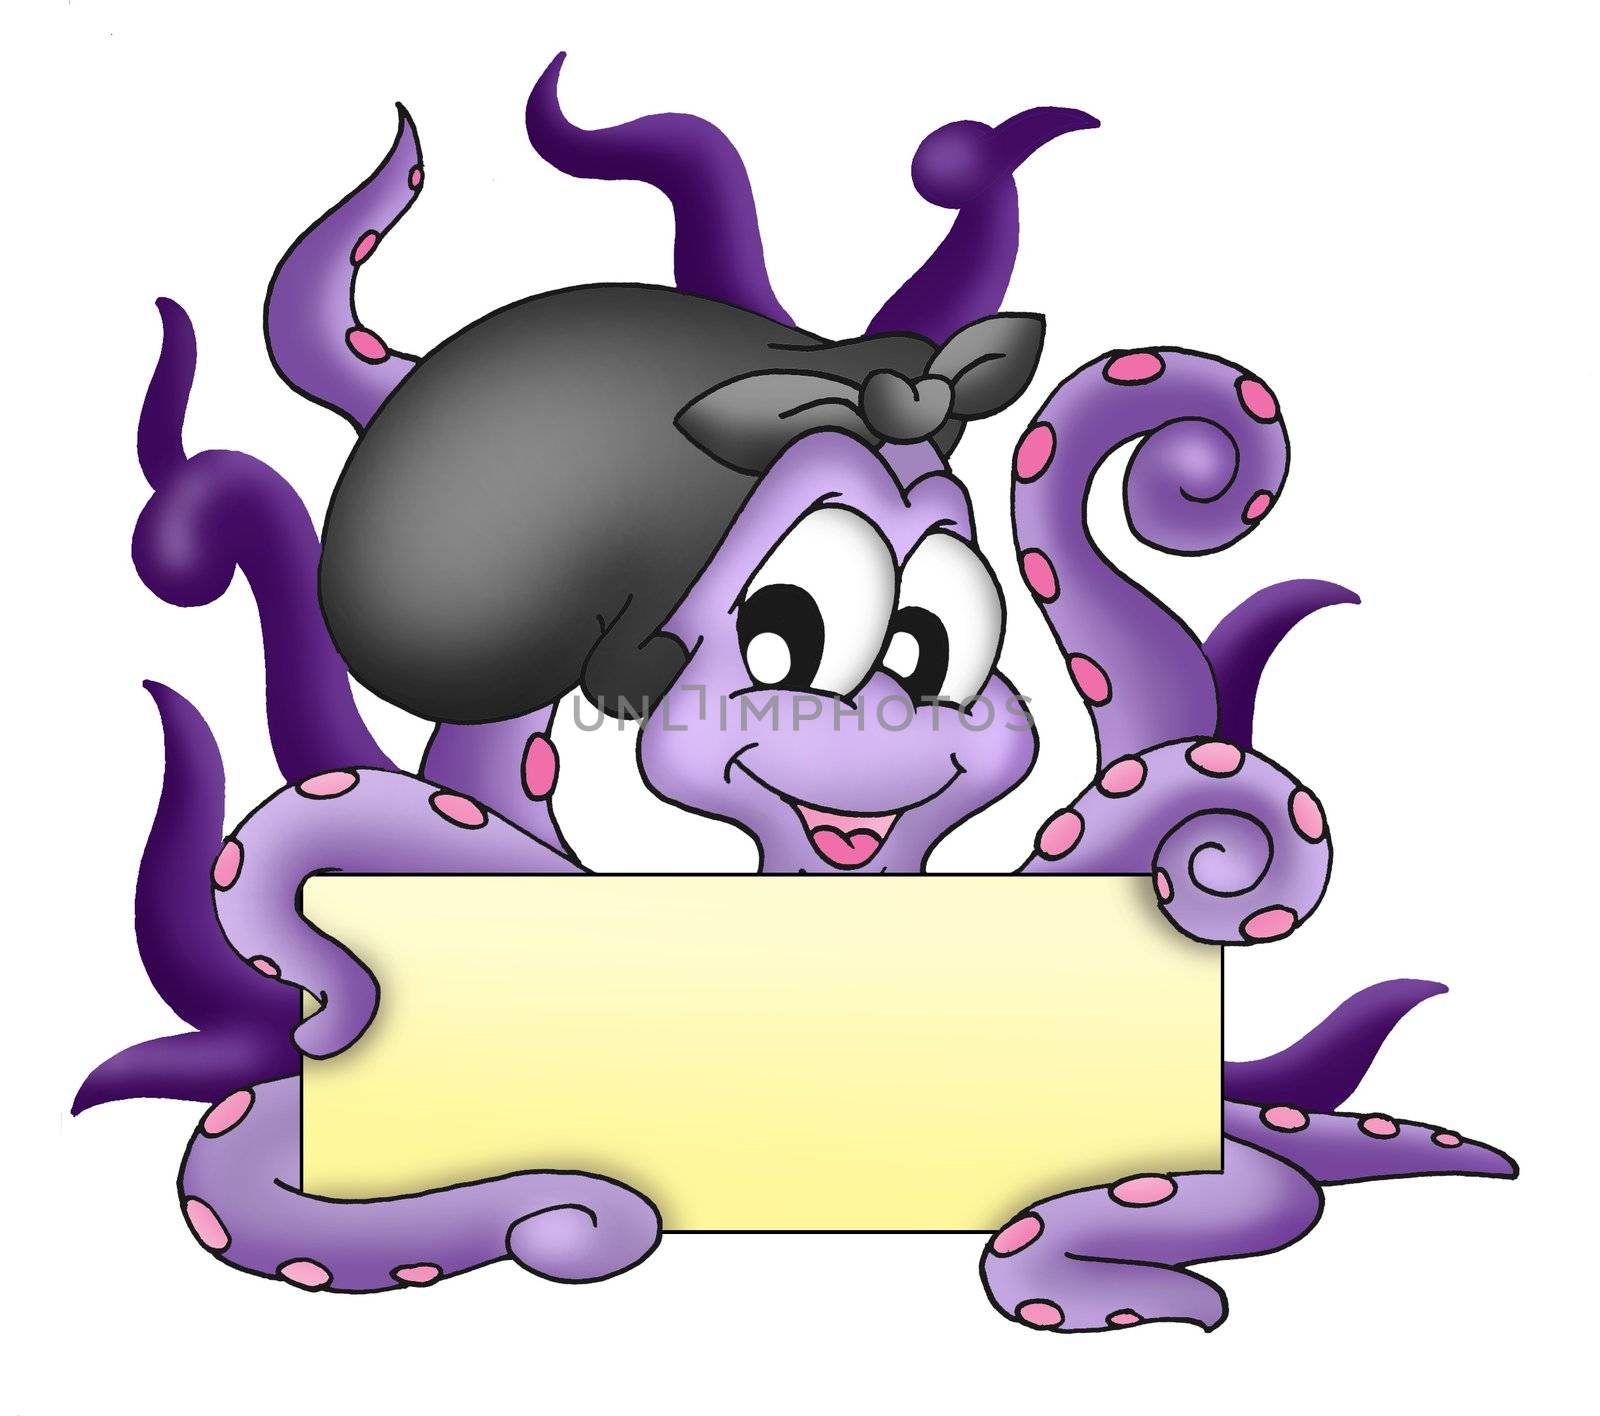 Octopus with text plate - color illustration.